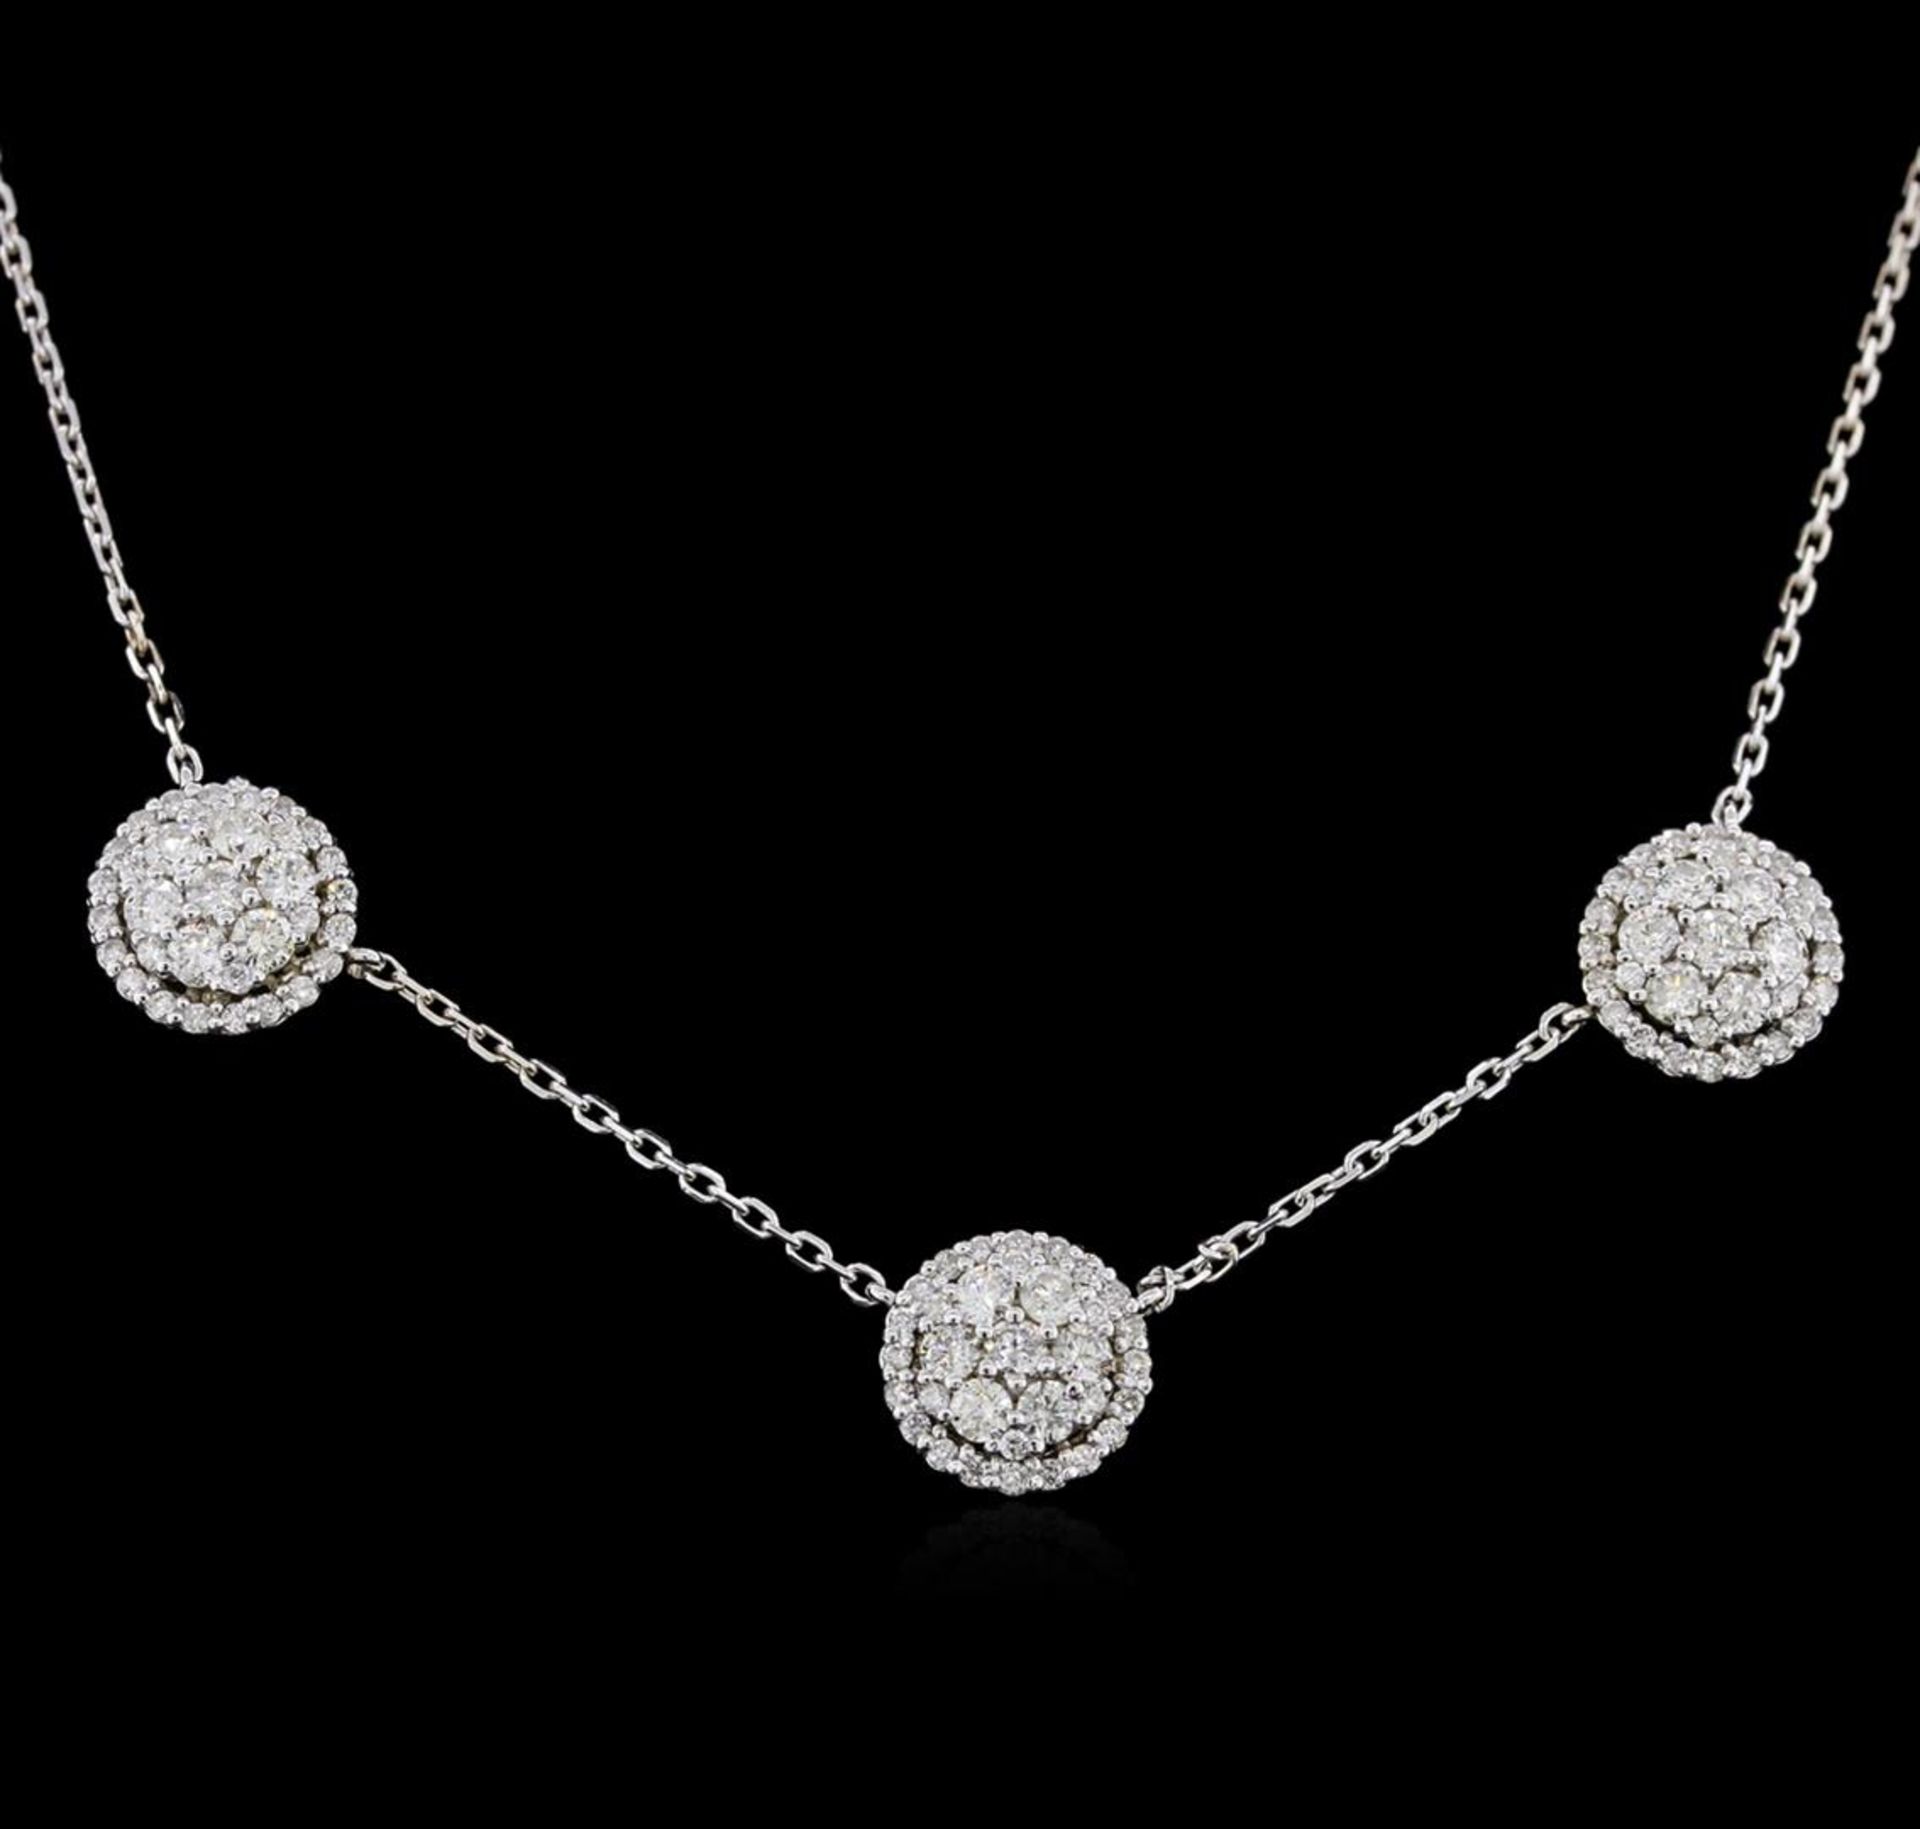 1.57 ctw Diamond Necklace - 14KT White Gold - Image 2 of 3